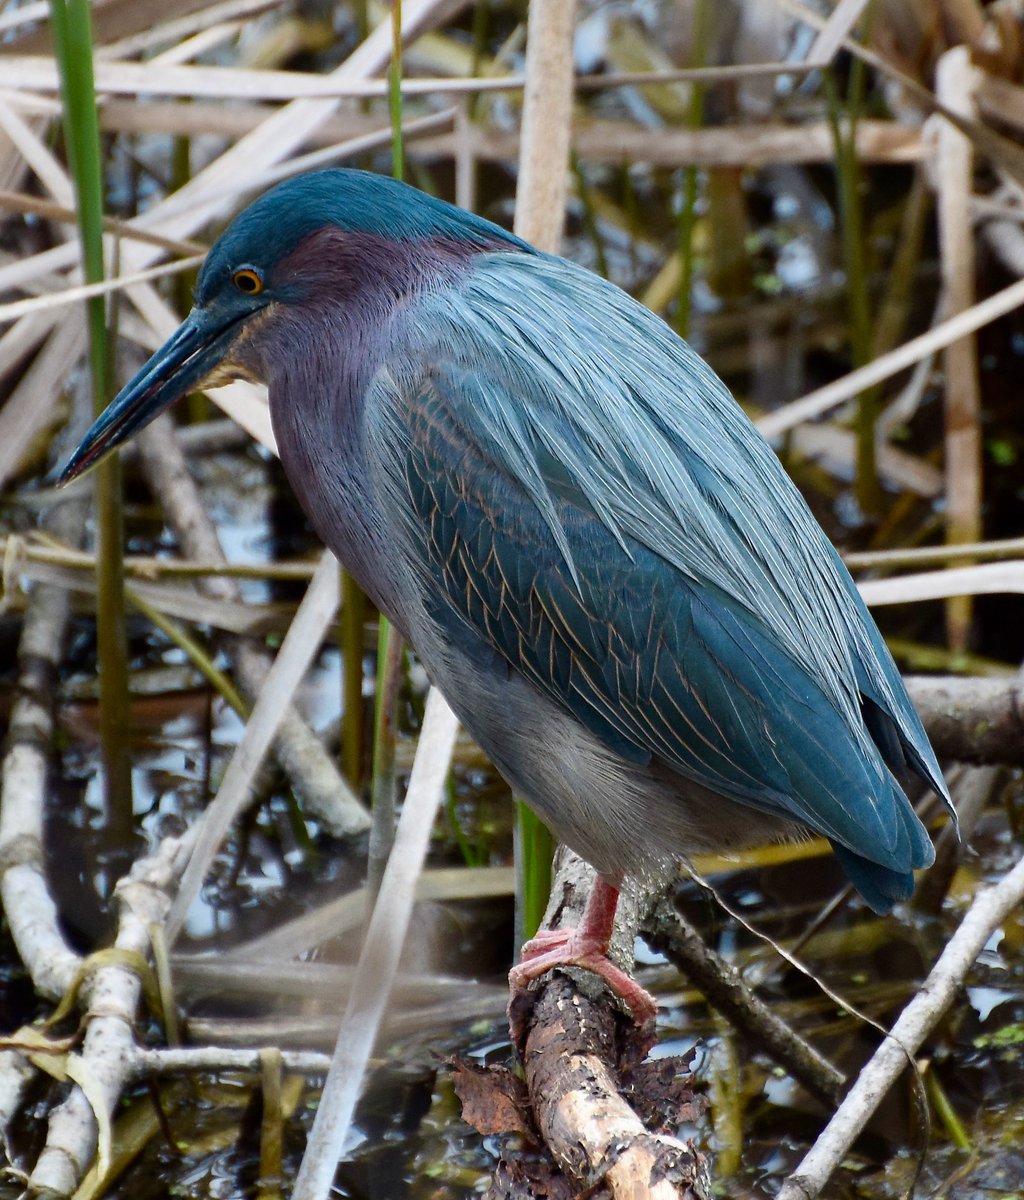 Beautiful Green Heron fishing at Fletcher Wildlife Garden. He was almost invisible standing amongst the rushes as he was well hidden & is about the size of a crow. #Ottawa #BirdWatching #StormHour #ShareYOurWeather @ThePhotoHour